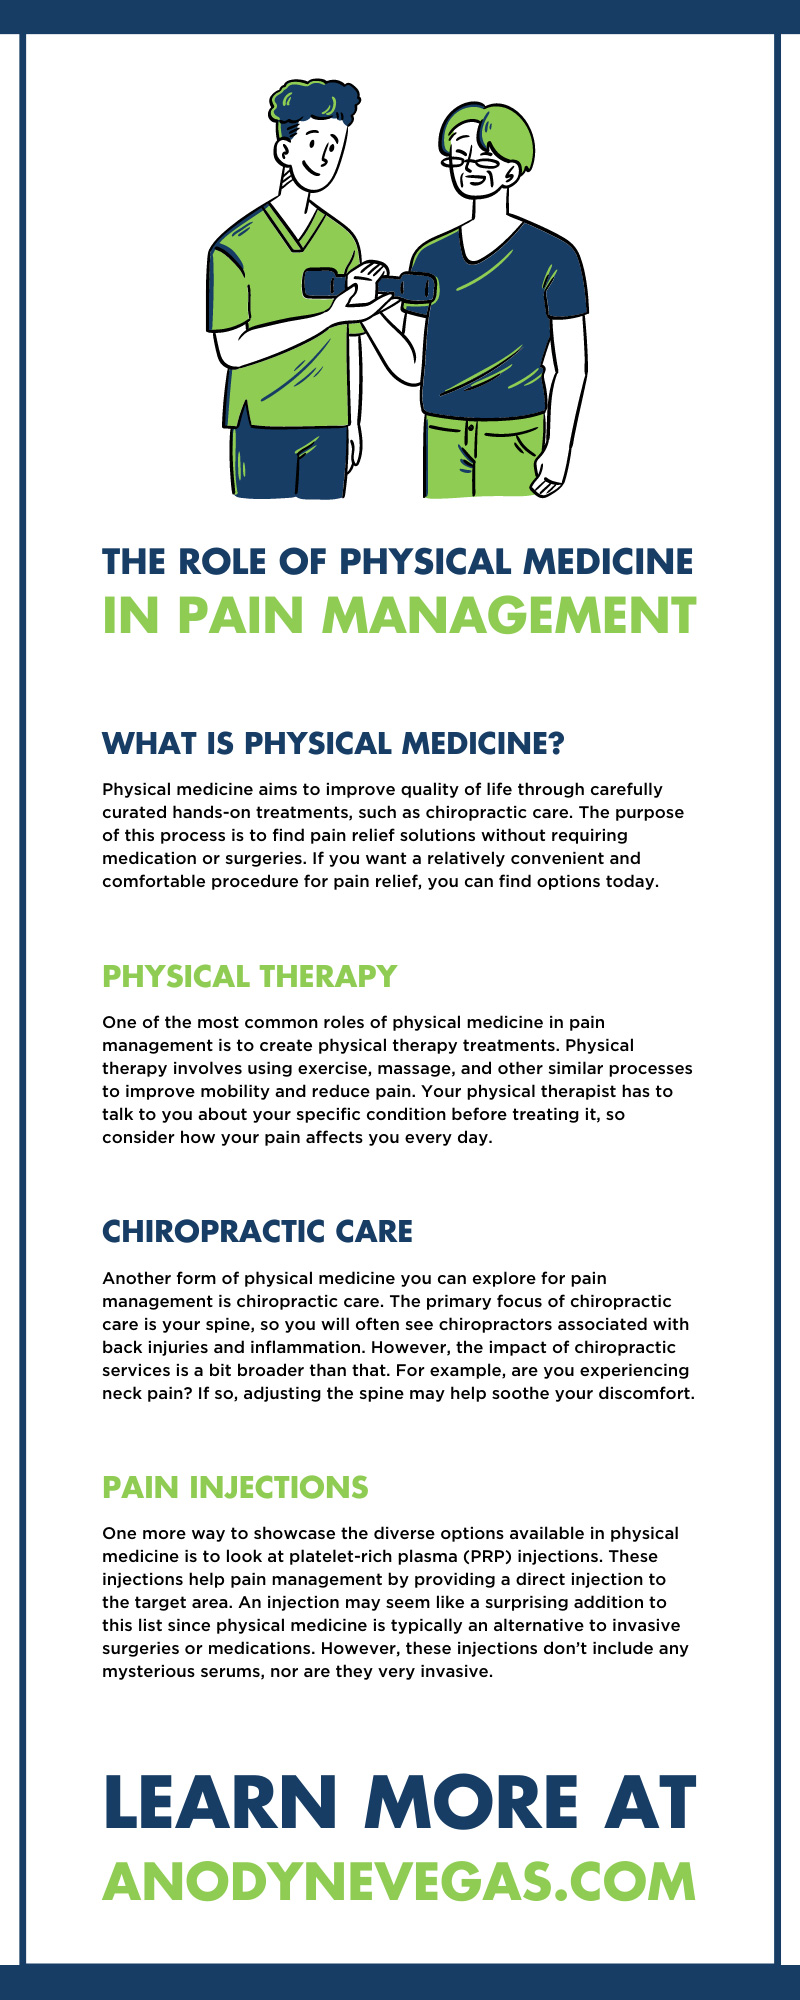 The Role of Physical Medicine in Pain Management